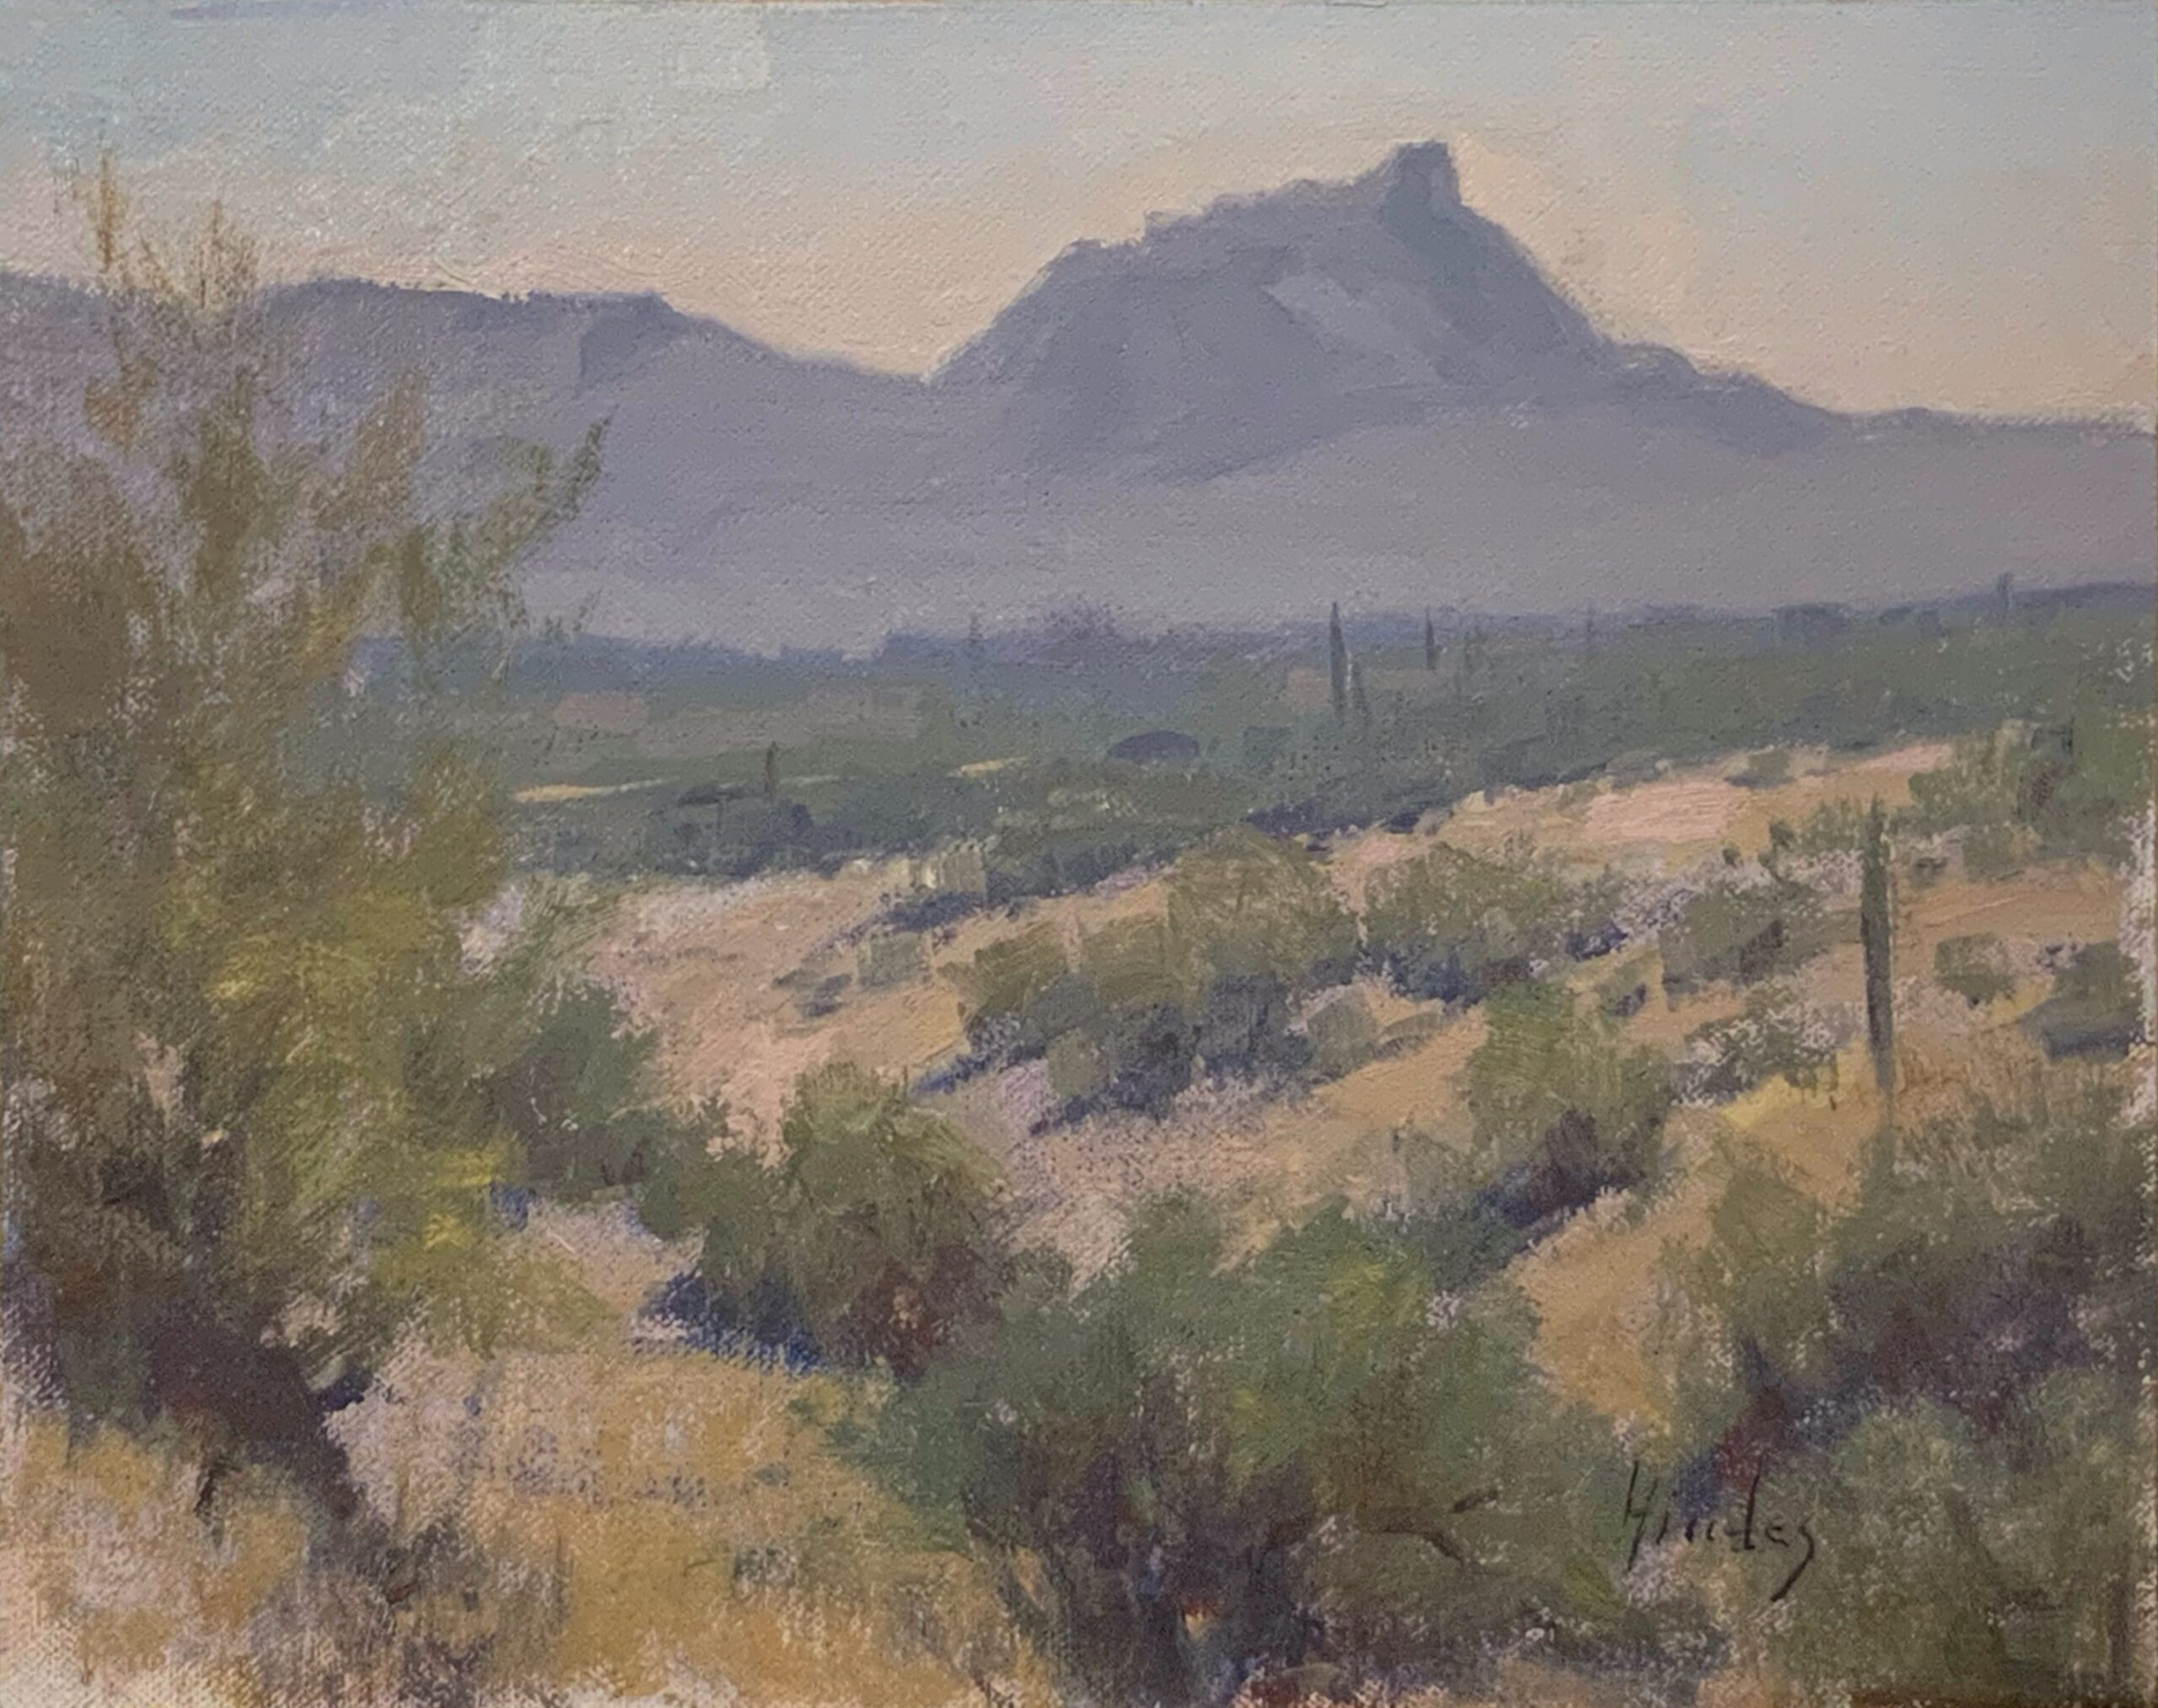 Pinnacle Peak Art Piece available at Hindes Fine Art Gallery